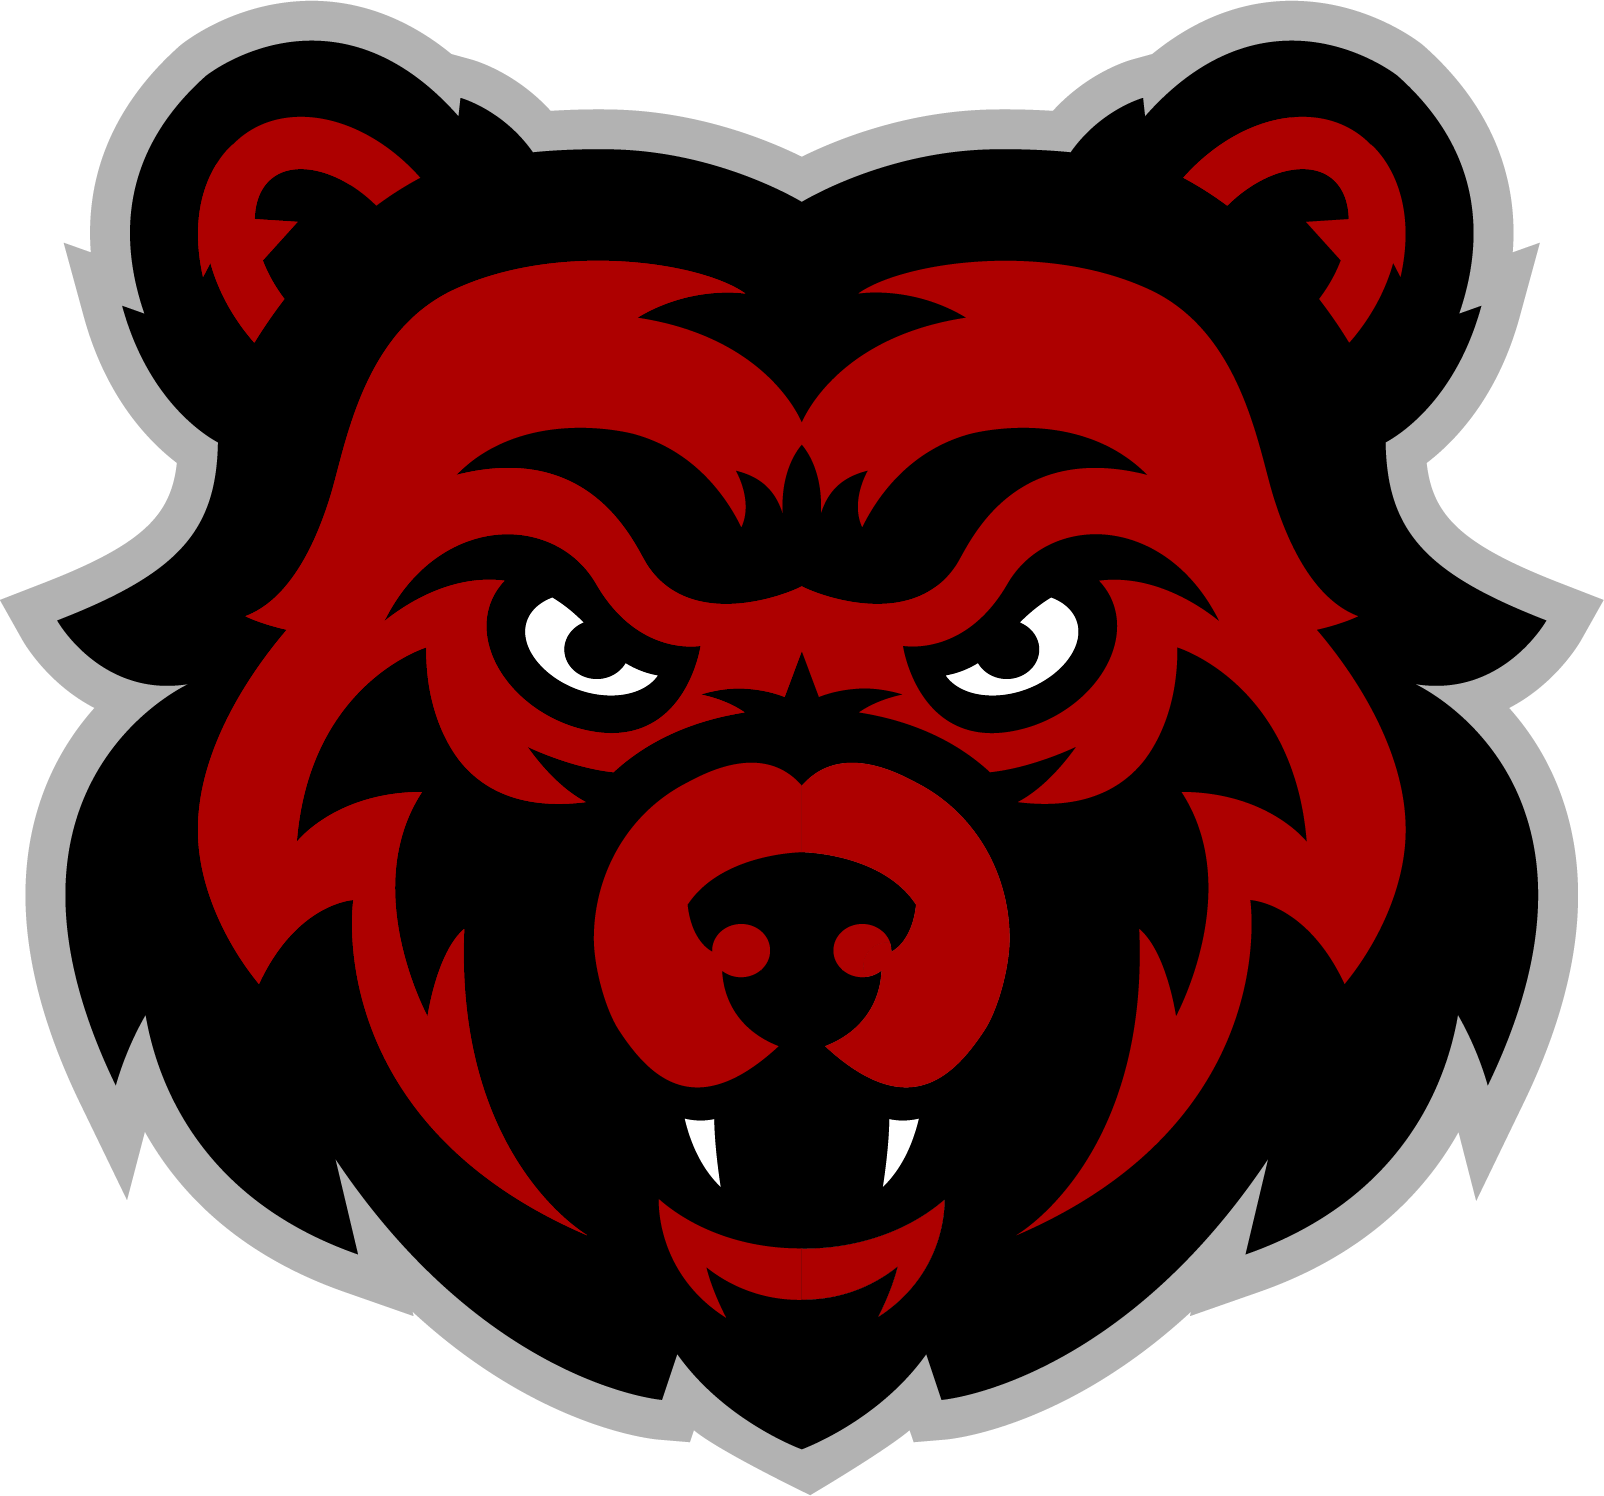 Red and Black Bear Face Logo - Branding Guide Park City Elementary - Barren County School District